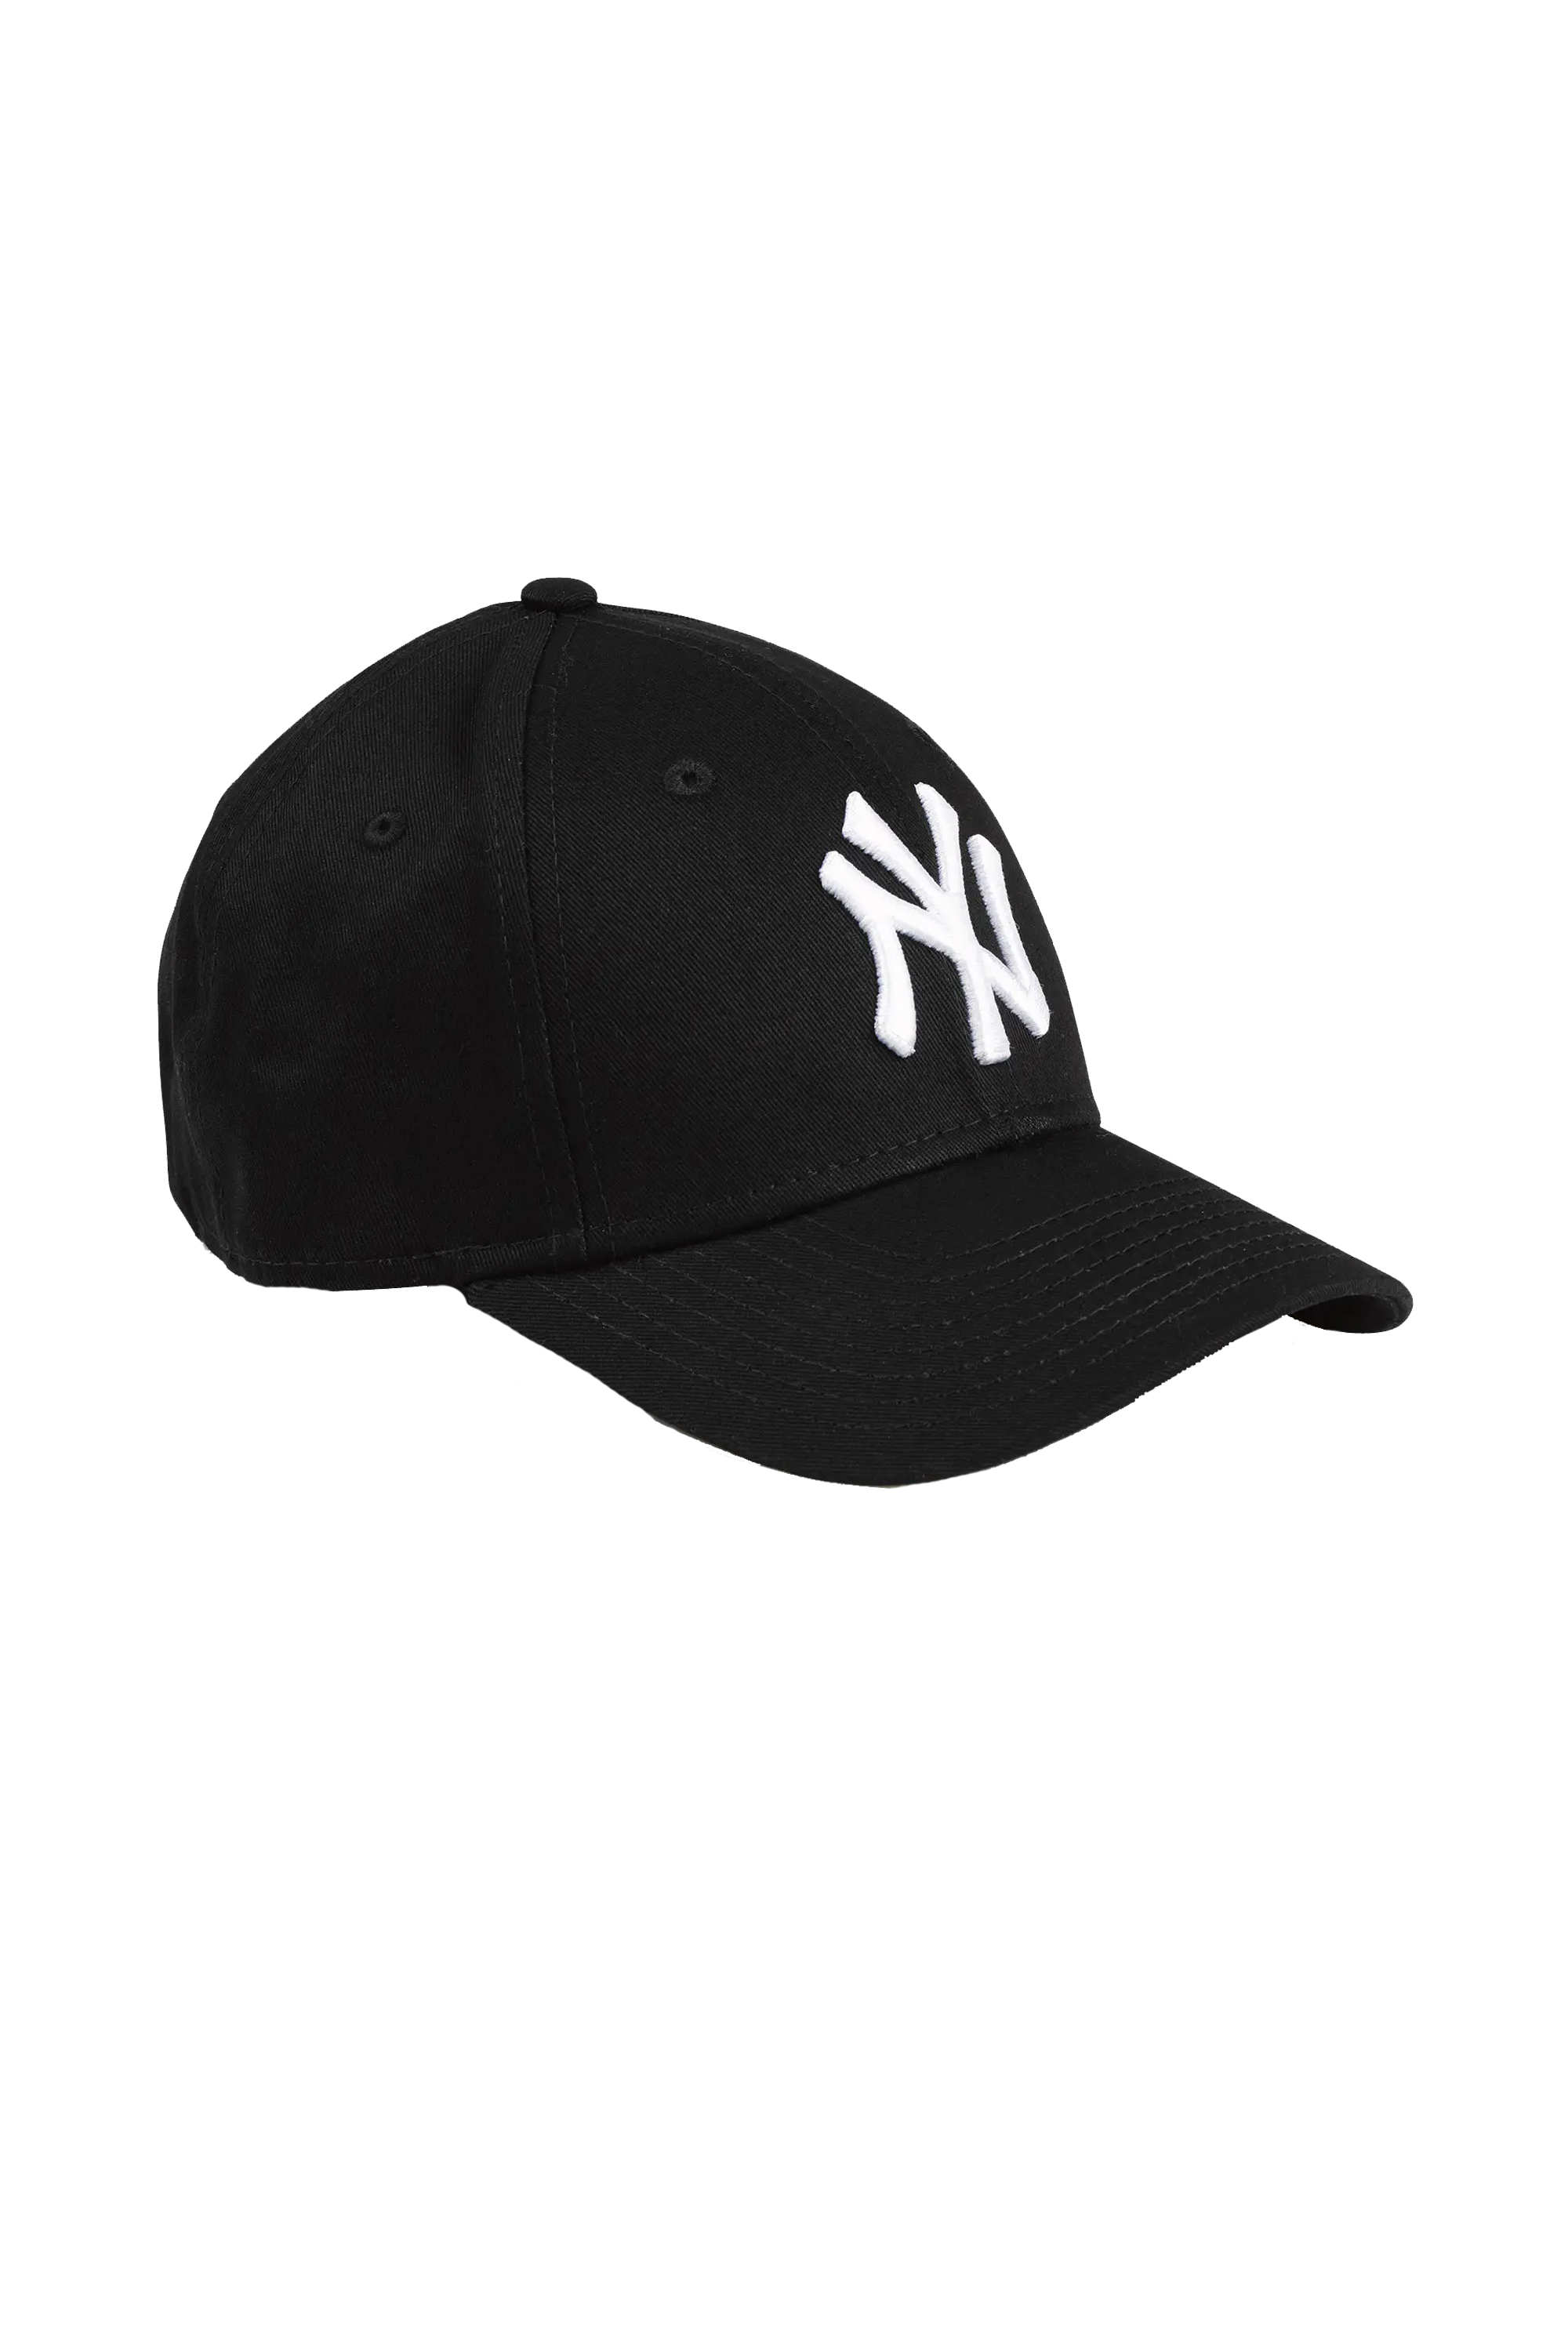 New Era - Casquette NY Yankees 9Forty - Taille TU